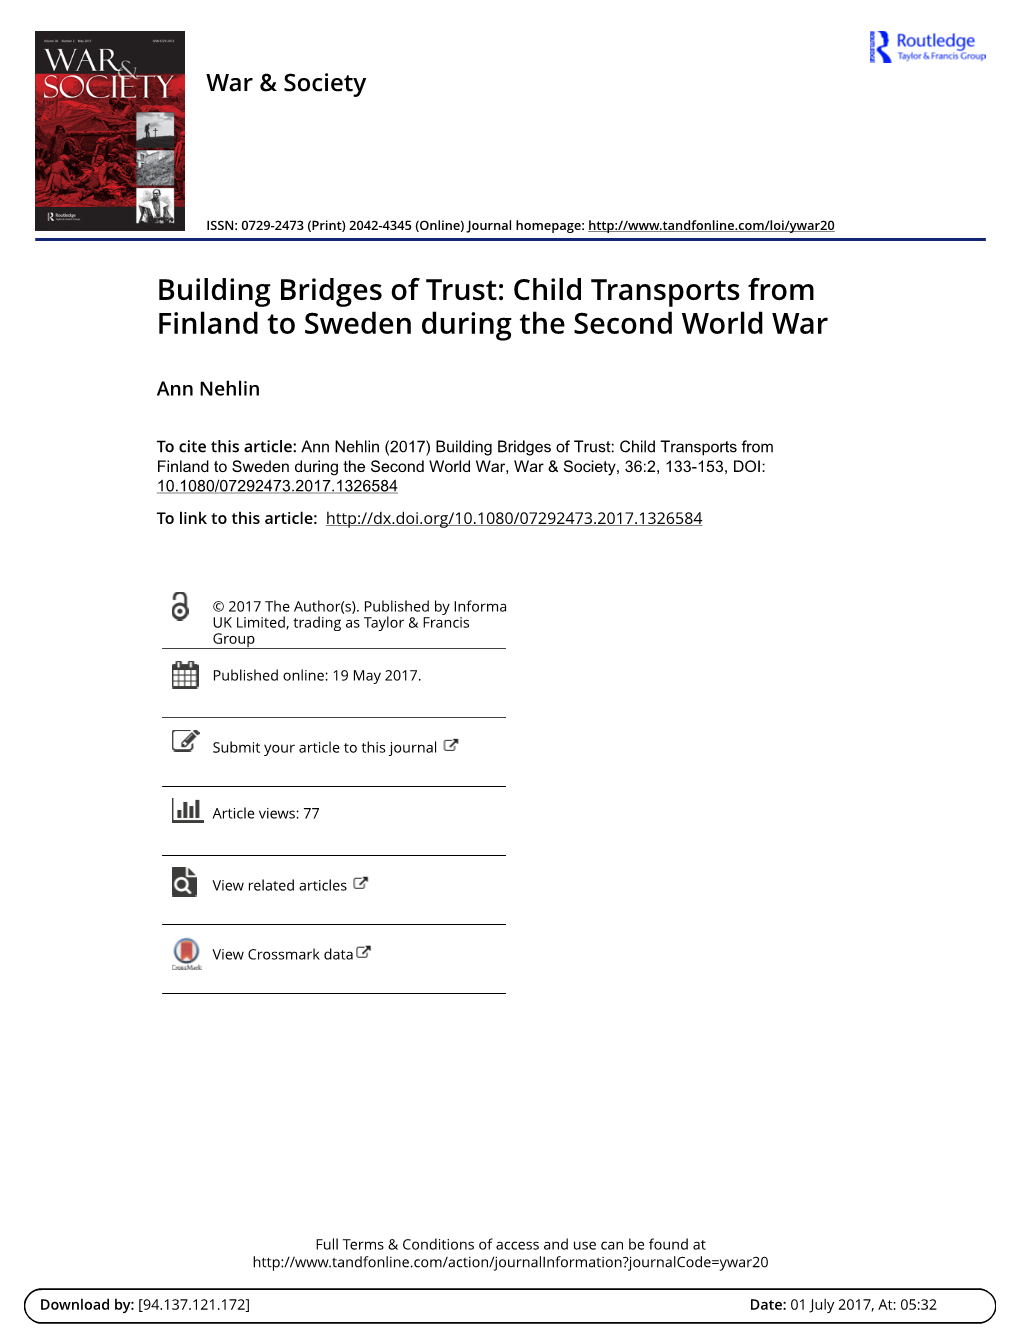 Child Transports from Finland to Sweden During the Second World War